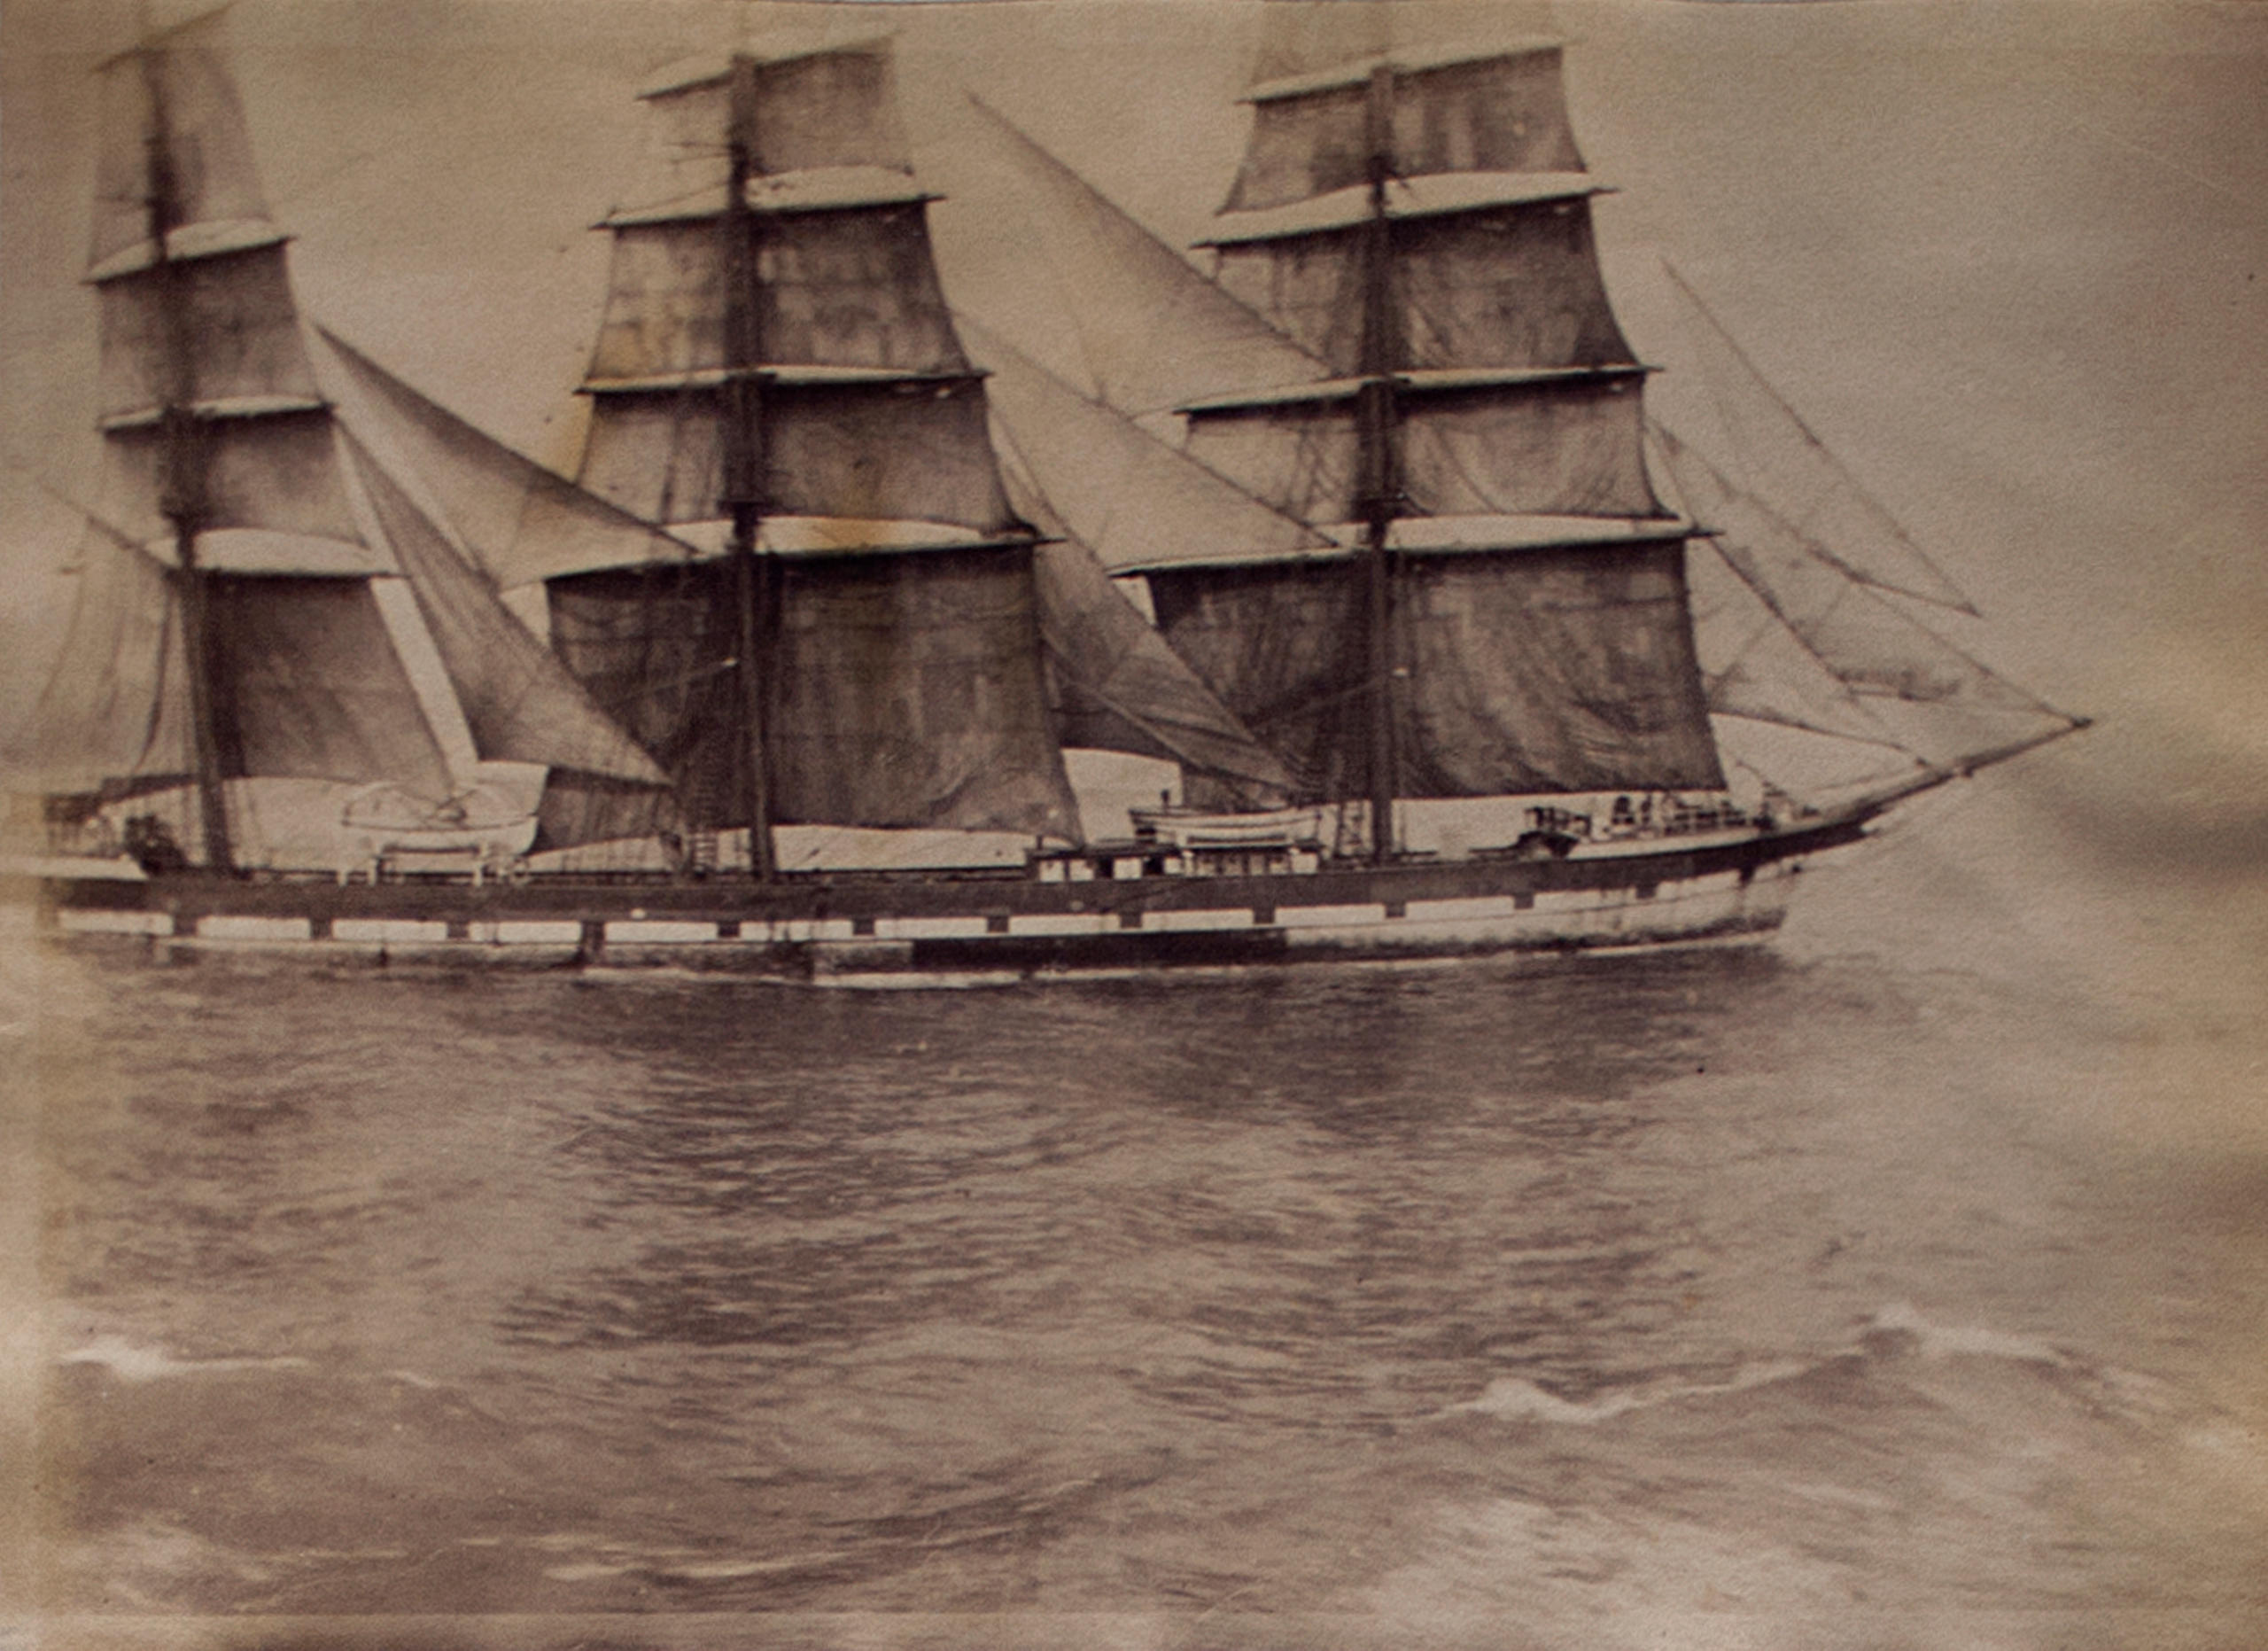 An old picture of a ship at sea.